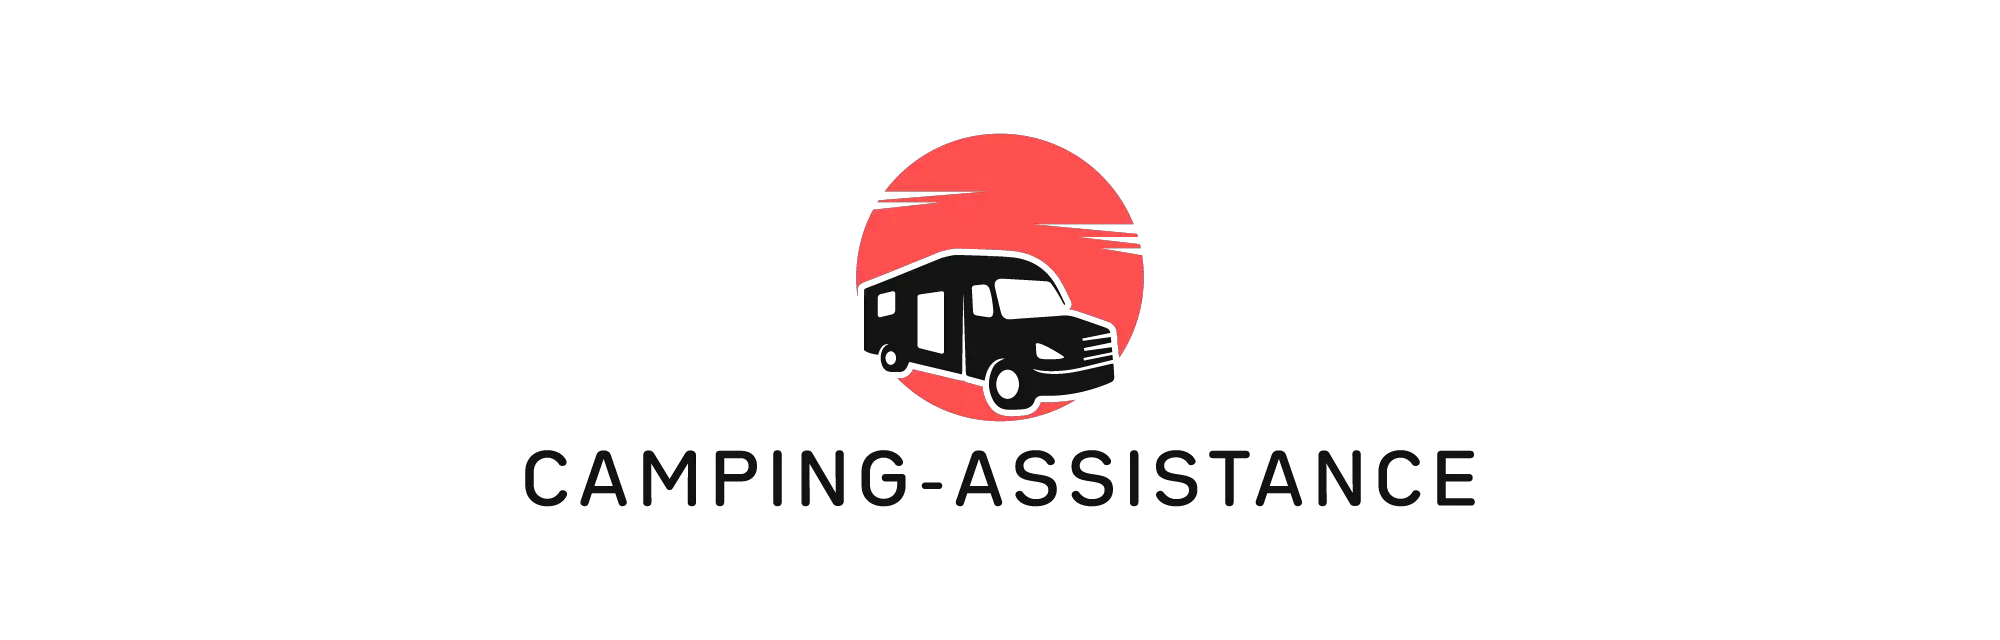 Camping-assistance